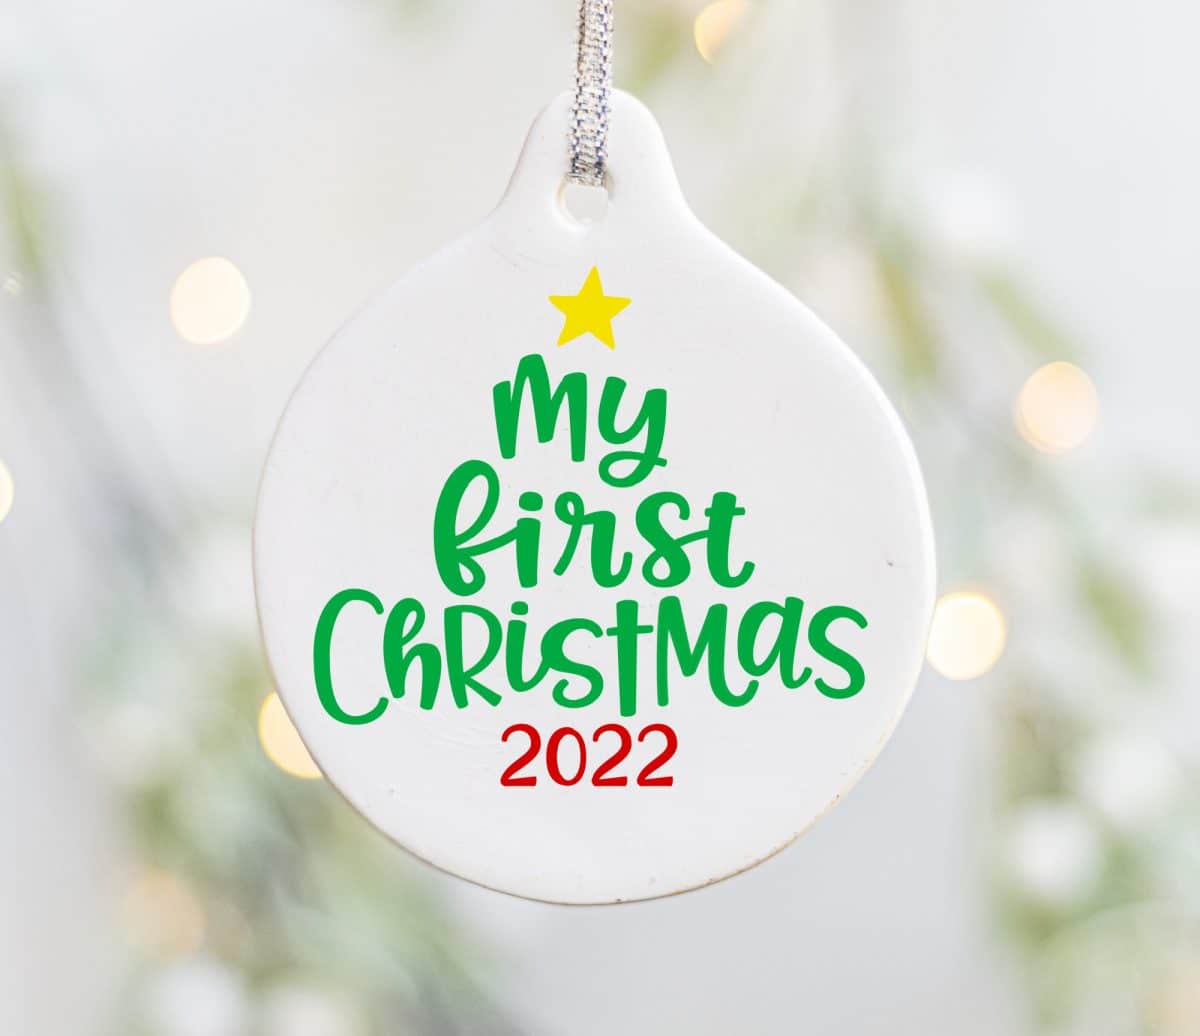 Baby's First Christmas SVG Bundle